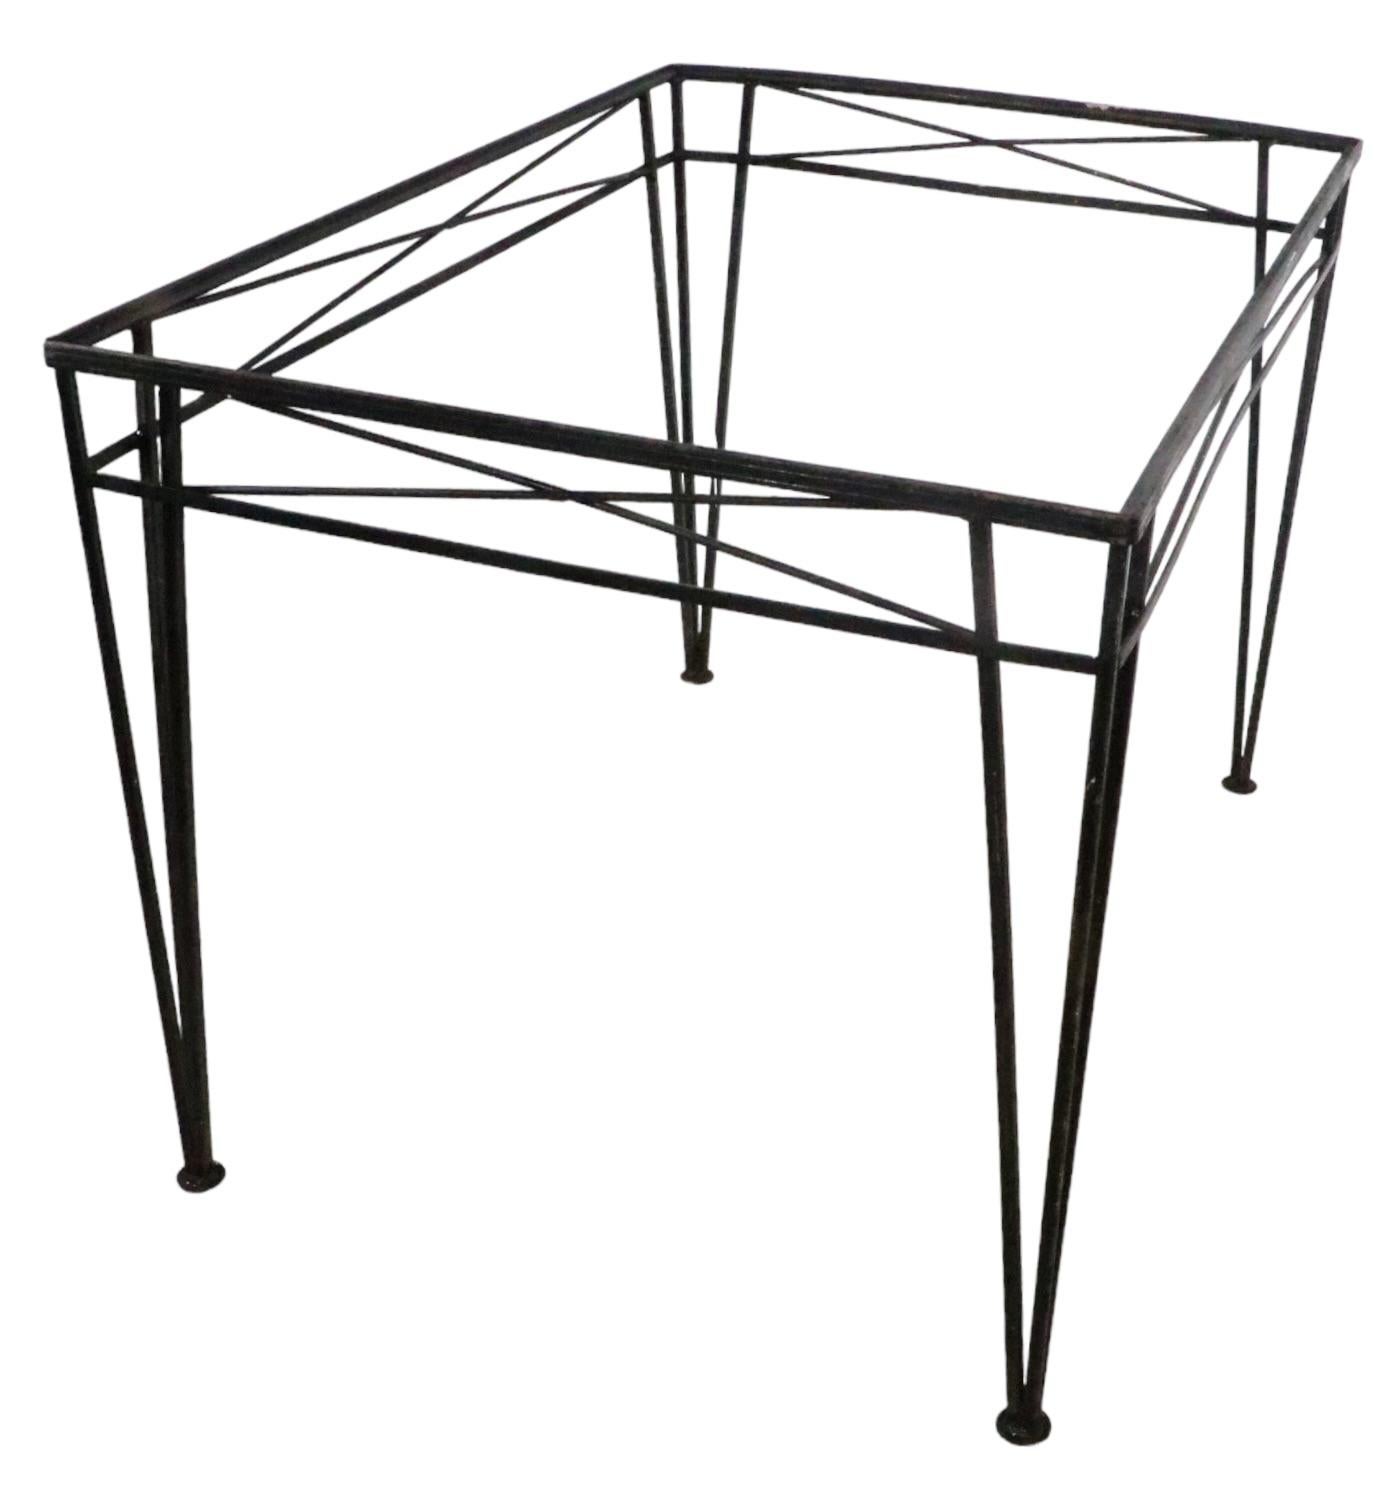 Chic architectural dining table constructed of wrought iron, attributed to Salterini, in the style of Woodard Furniture. This example is structurally sound and sturdy, the finish shows cosmetic wear, normal and consistent with age. The table is